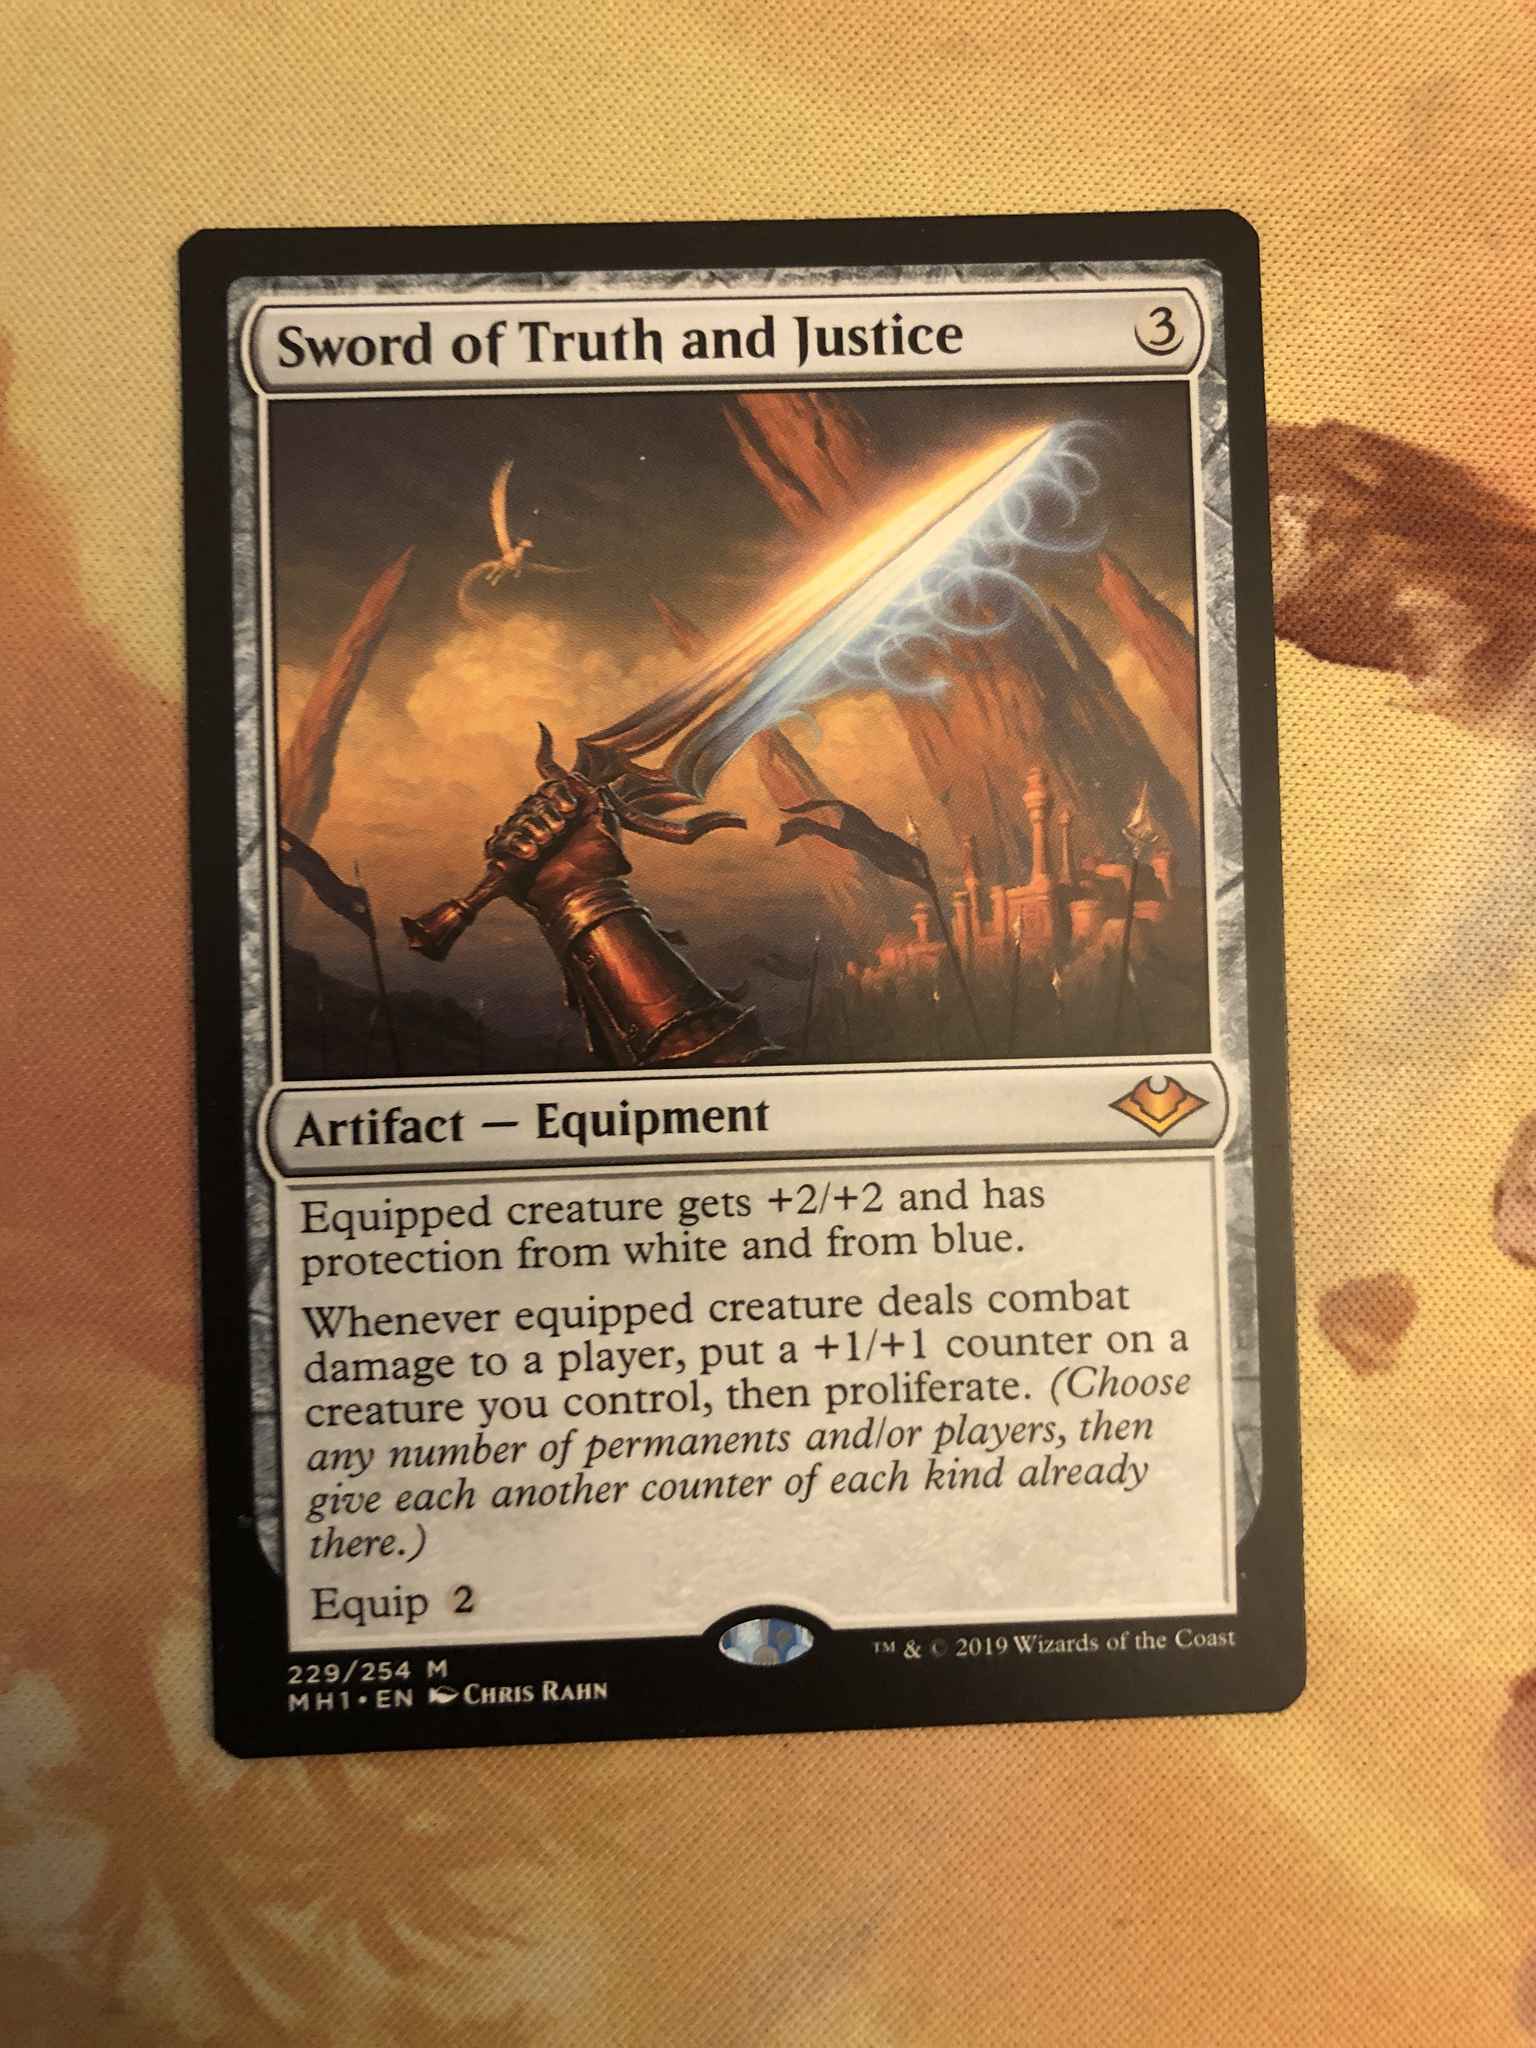 Pack Fresh Always Sleeved MH1 SWORD OF TRUTH AND JUSTICE NM 